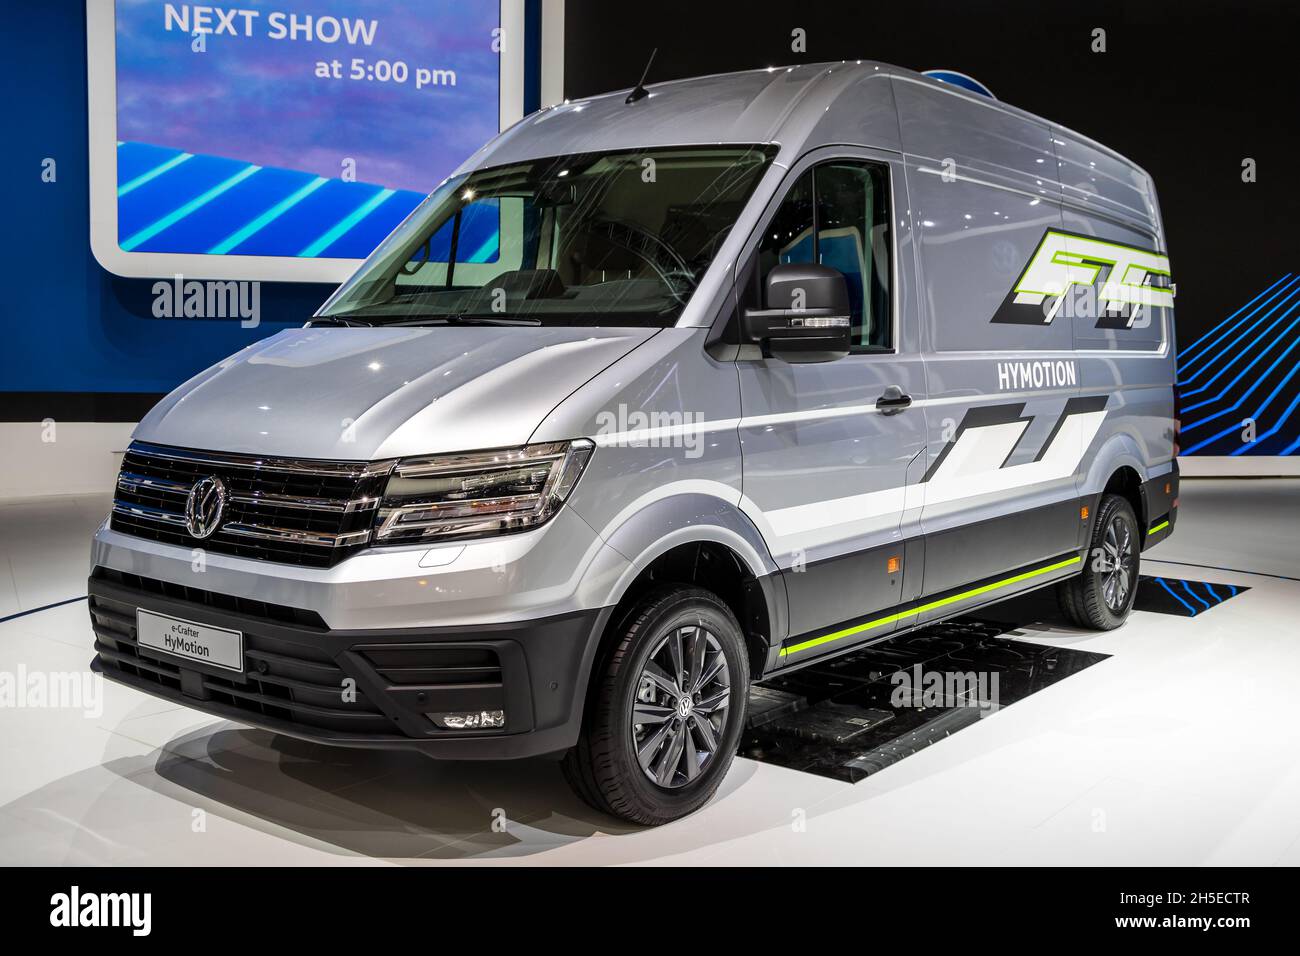 Volkswagen hydrogen-powered Crafter HyMotion concept van showcased at the Hannover IAA Commercial Vehicles Motor Show. Germany - September 27, 2018. Stock Photo